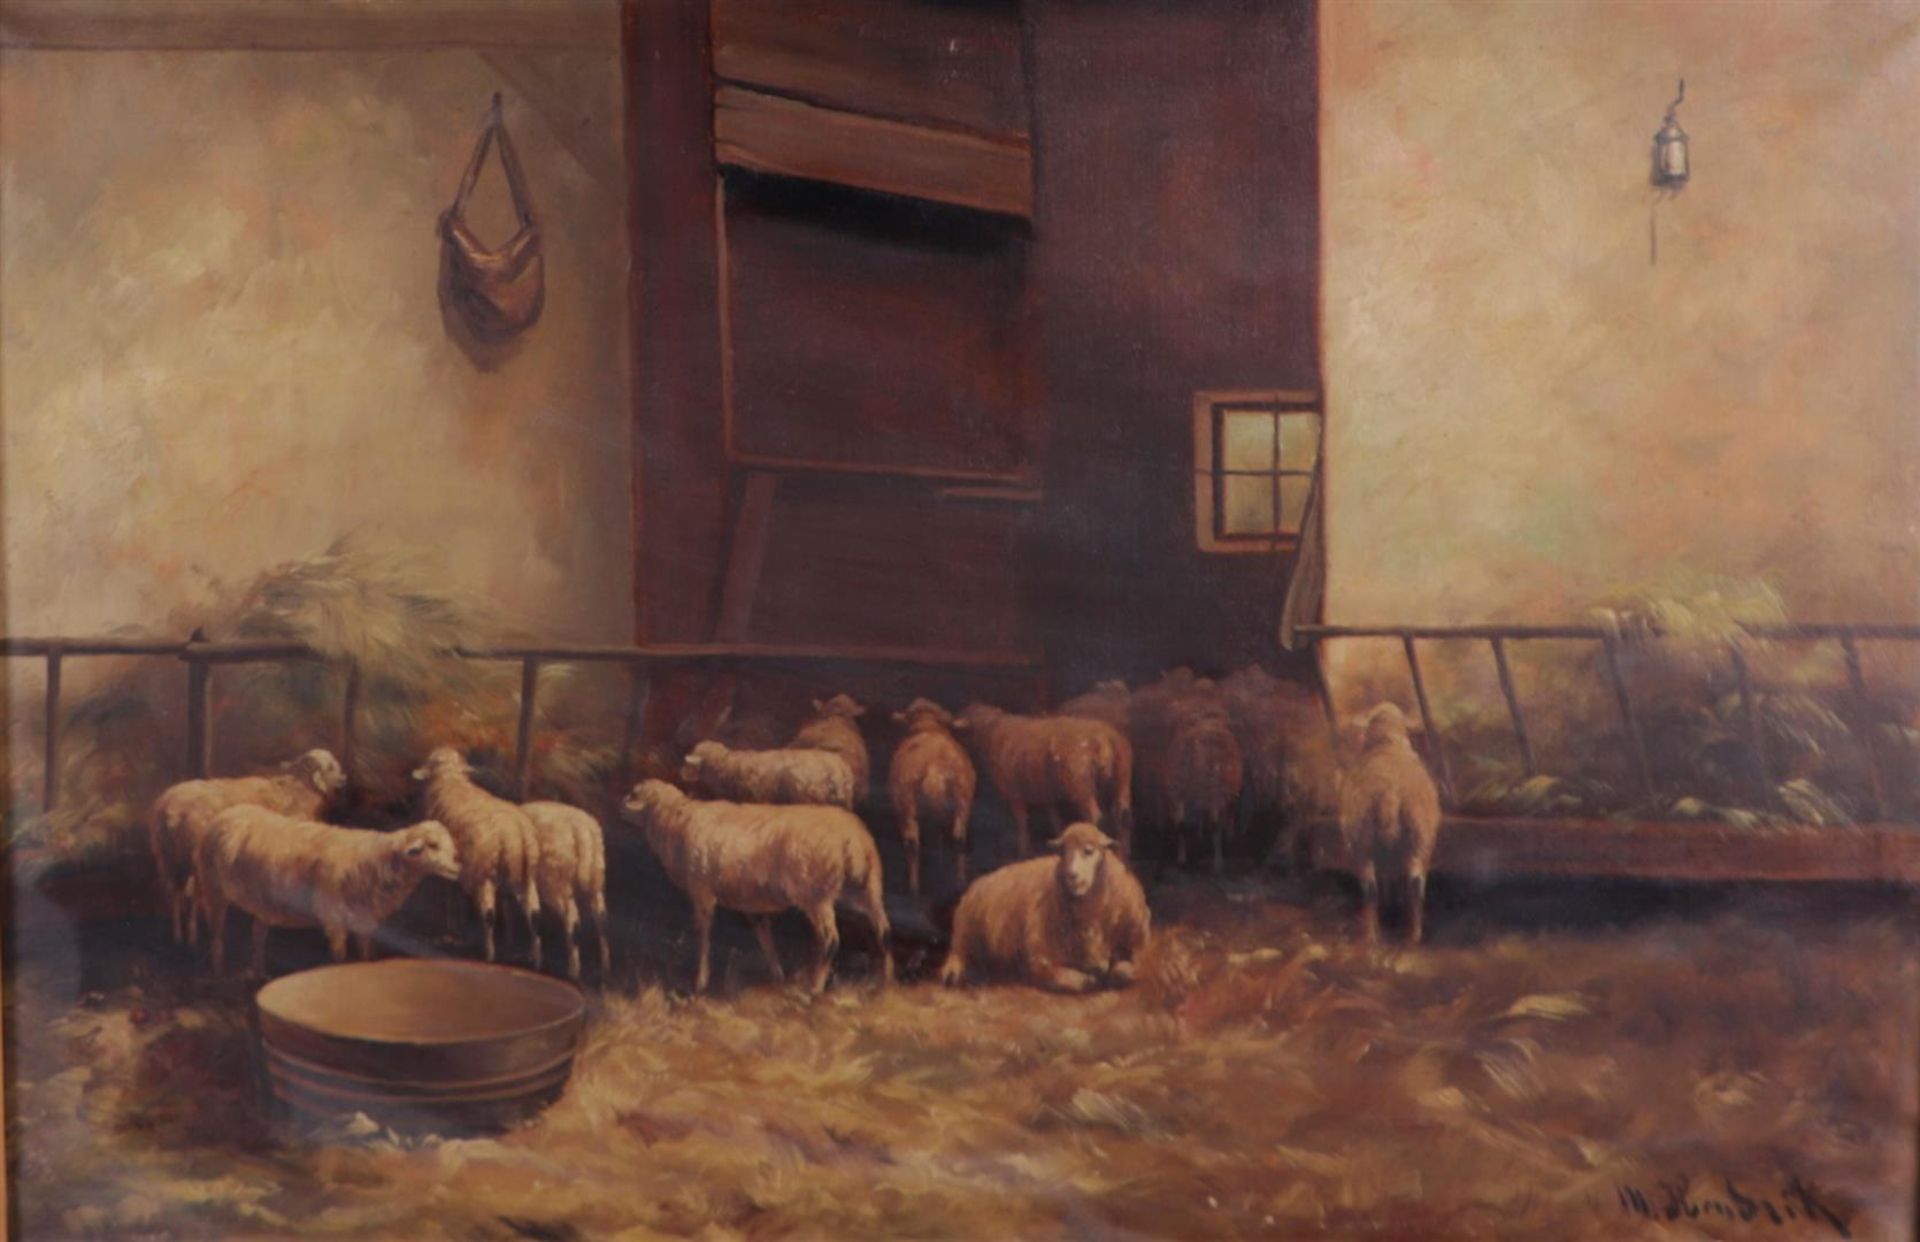 Dutch School, 20th century, Sheep stable, signed 'M. Hendrik' (bottom right), oil on canvas,
60 x 90